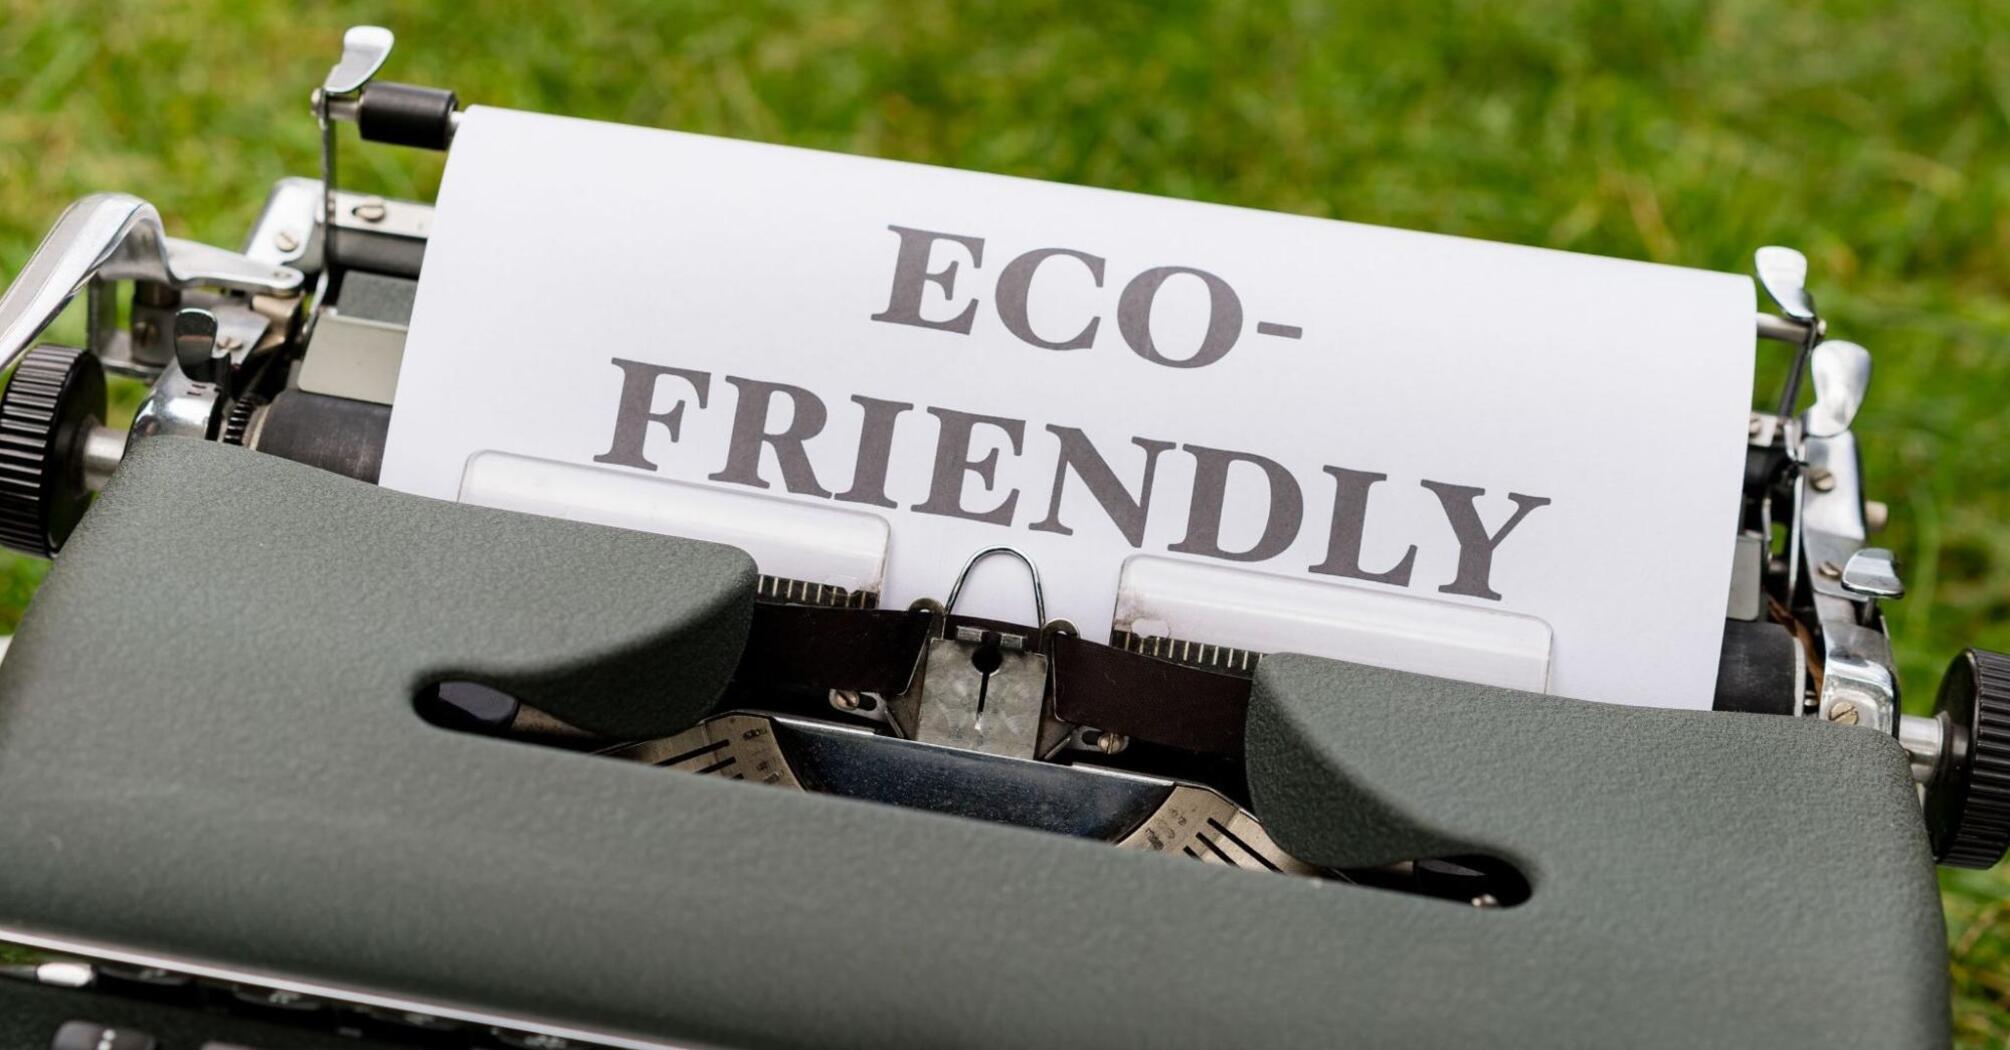 The phrase "Eco-friendly" typed on a typewriter 